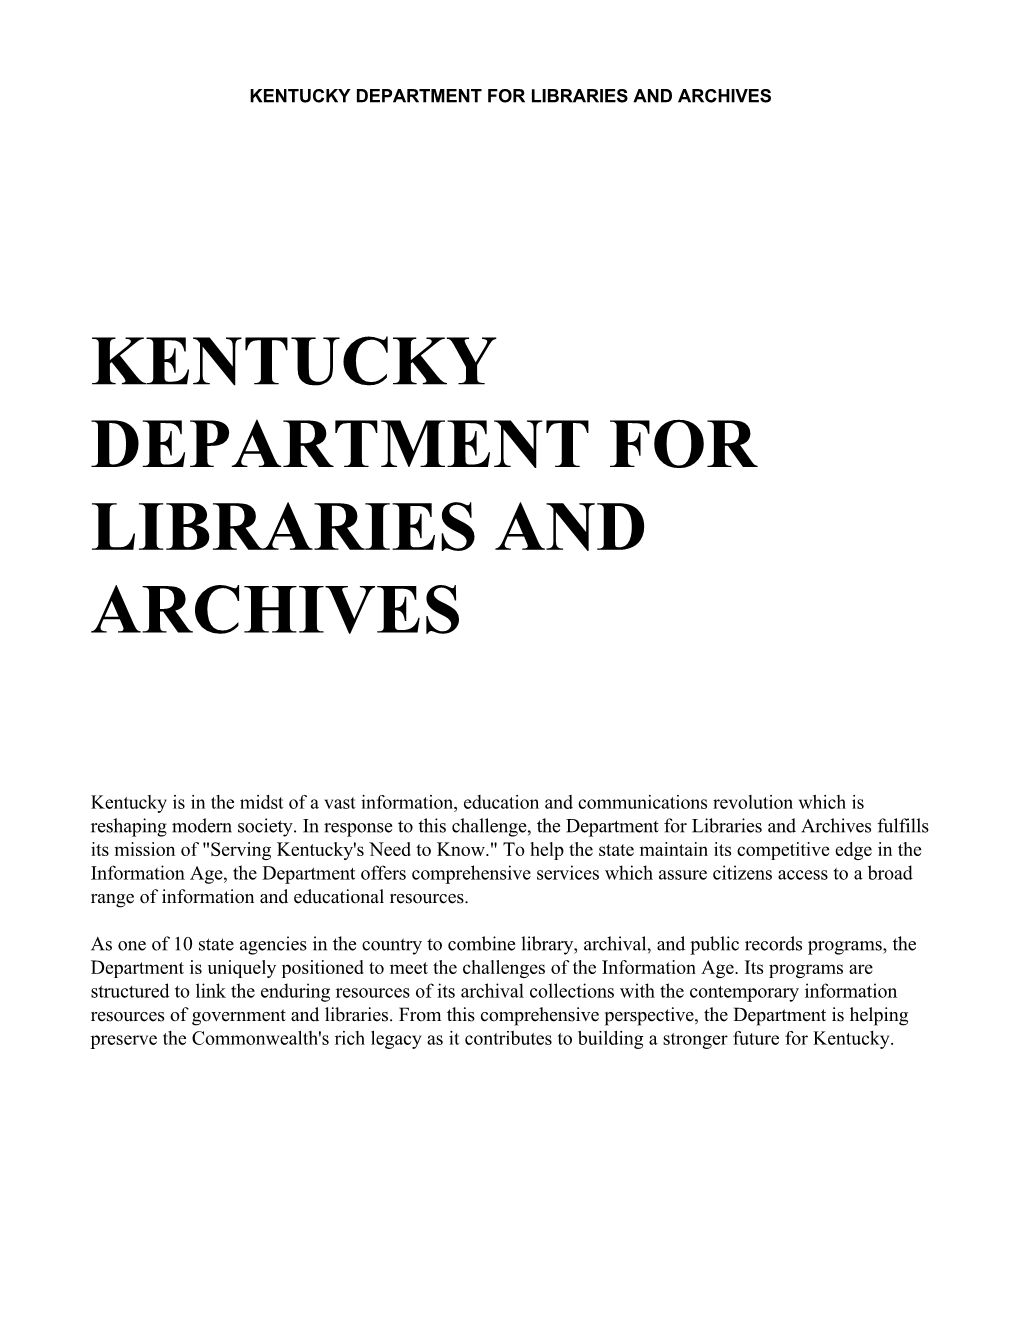 Institutional Libraries